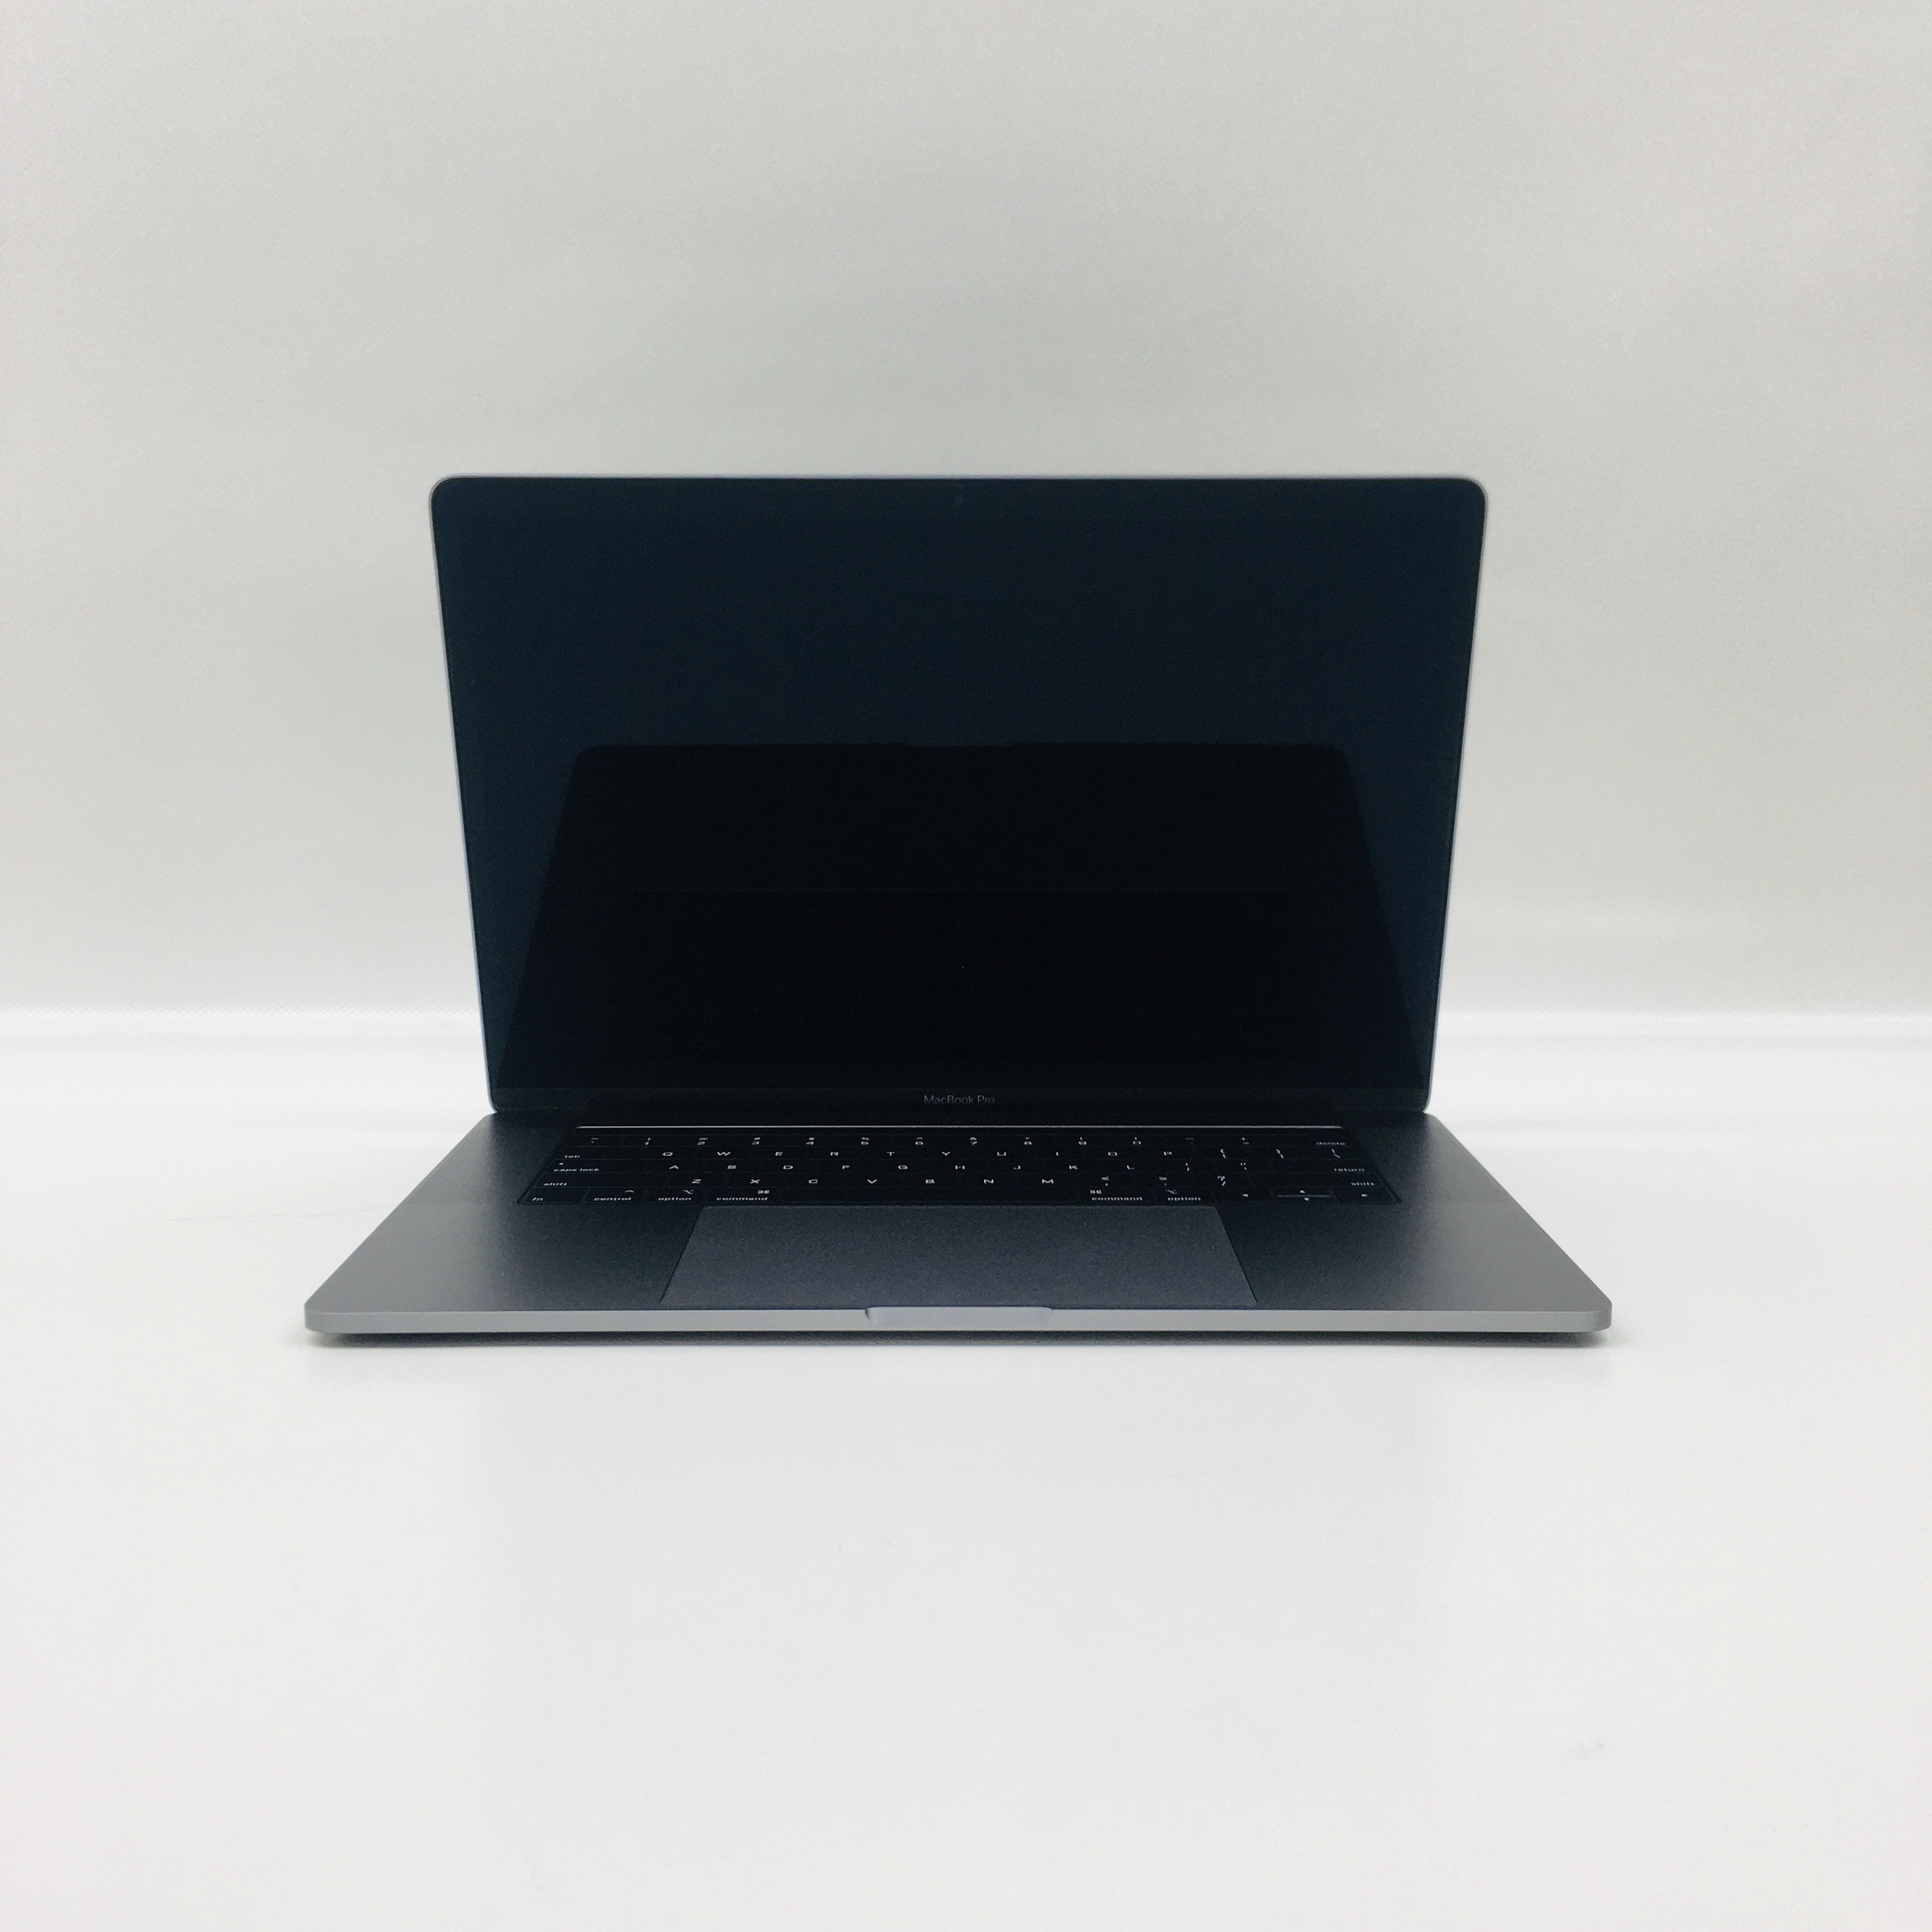 MacBook Pro 15" Touch Bar Mid 2018 (Intel 6-Core i7 2.6 GHz 32 GB RAM 512 GB SSD), Space Gray, Intel 6-Core i7 2.6 GHz, 32 GB RAM, 512 GB SSD, image 1